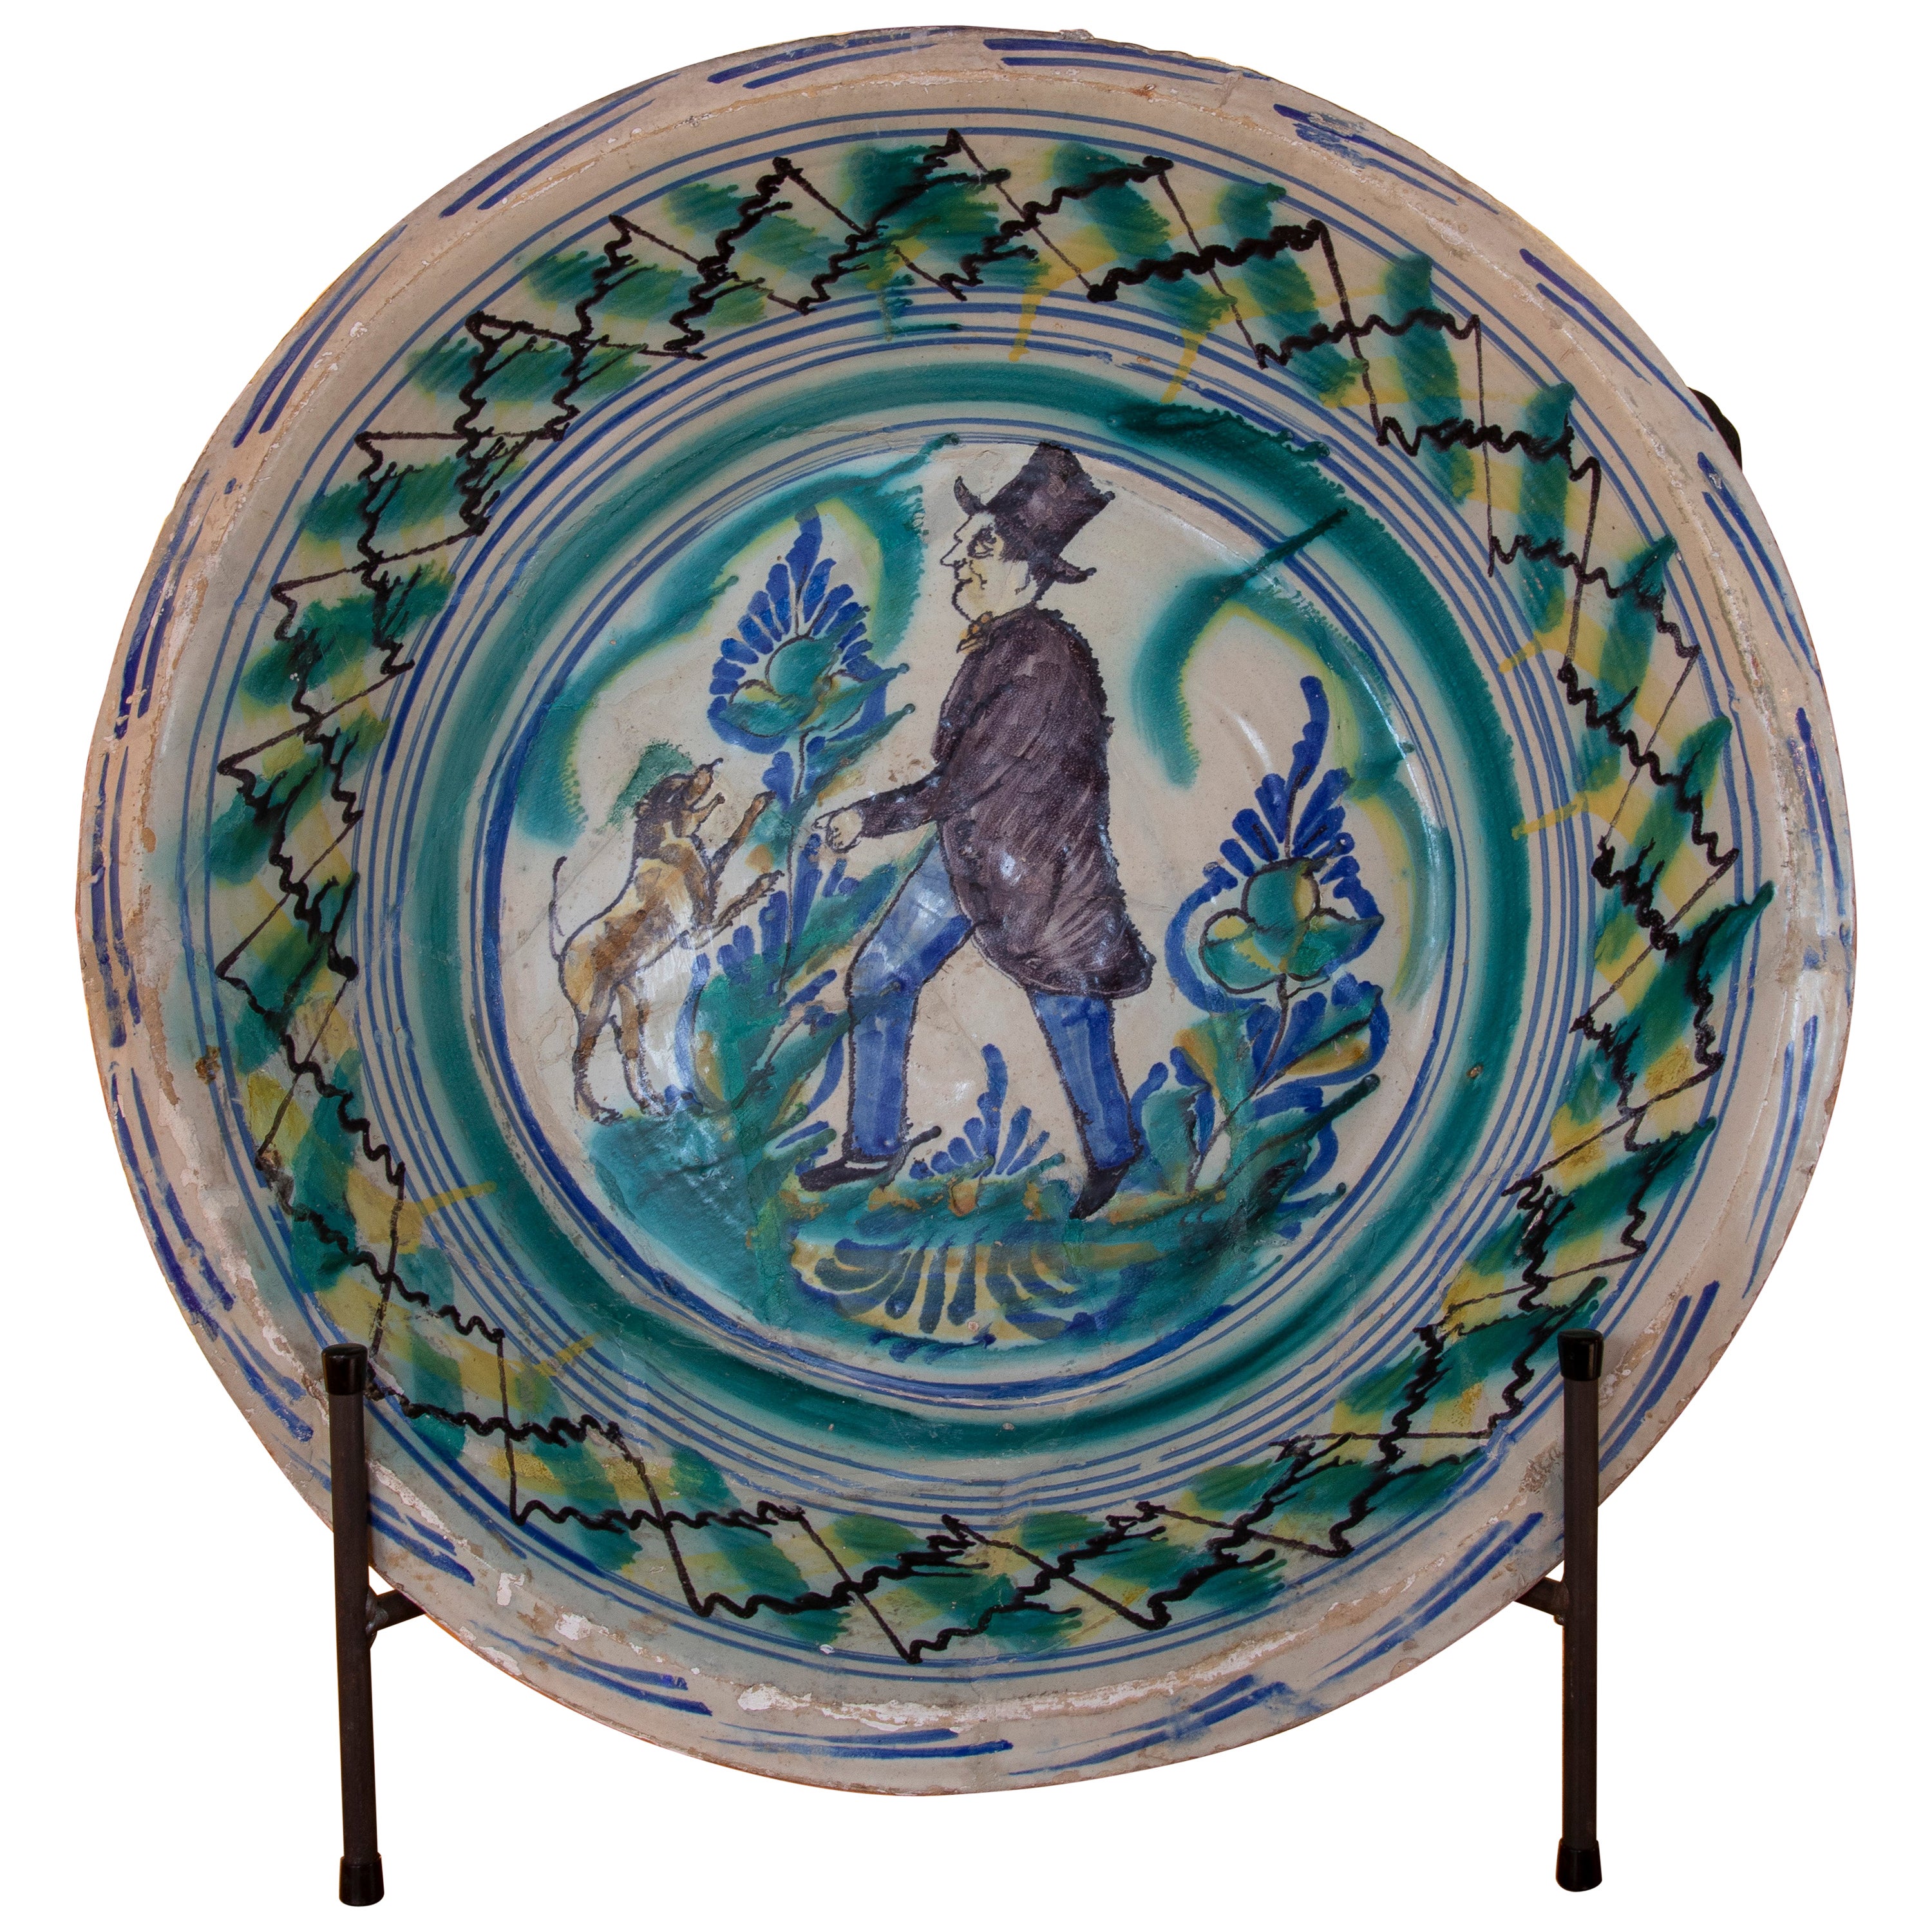 19th Century Spanish Triana "Lebrillo" Ceramic Plate with Painted Person and Dog